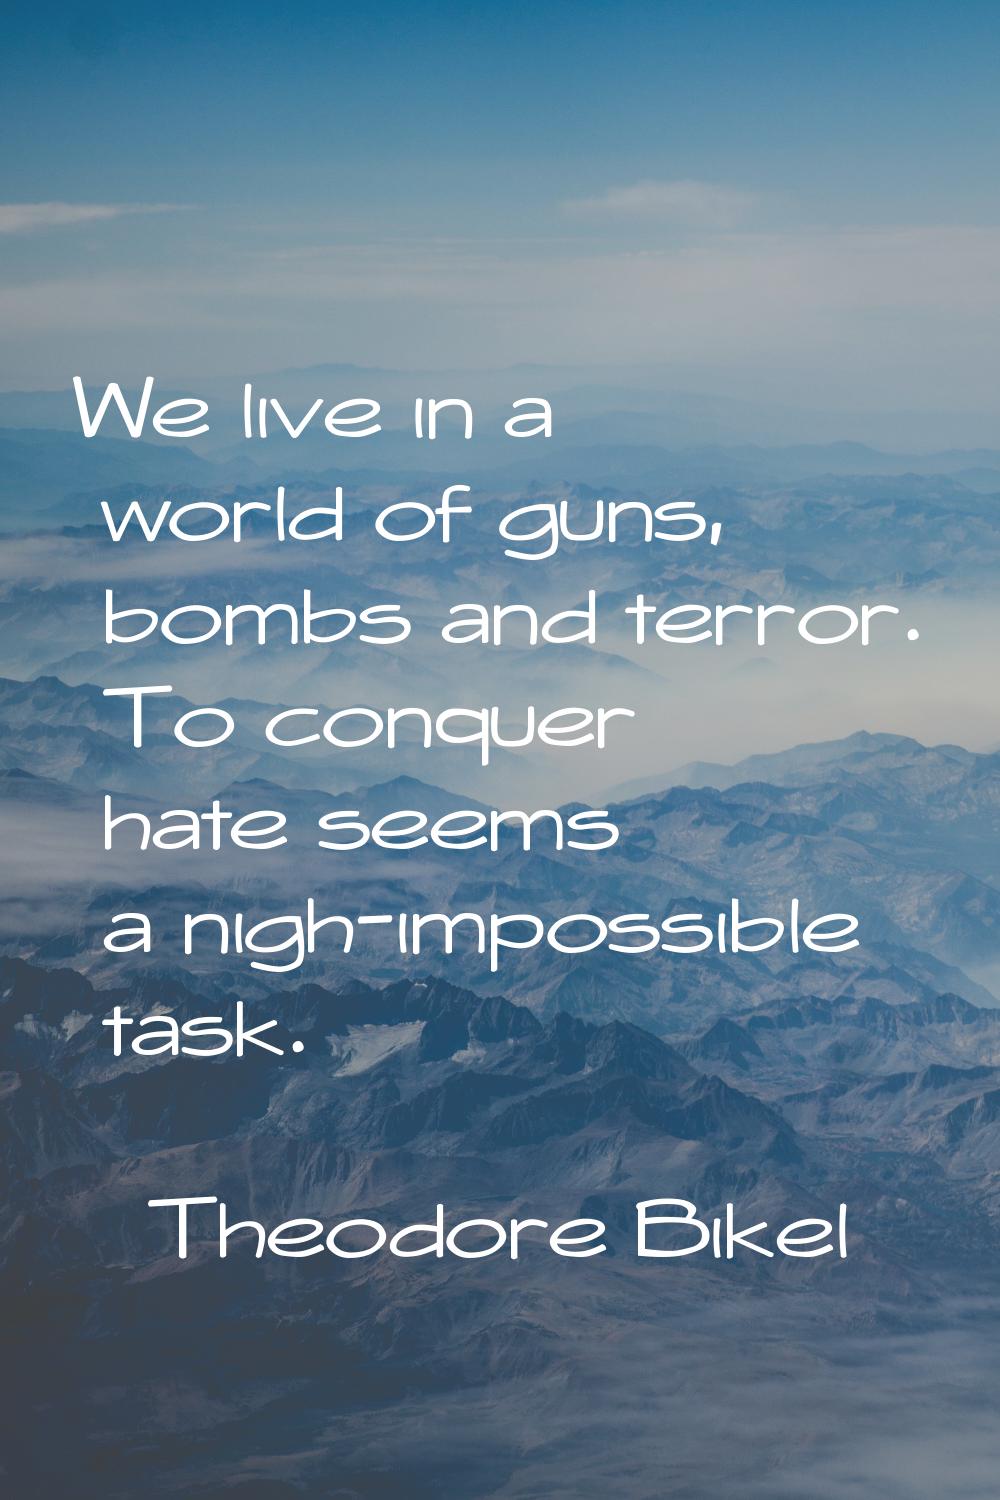 We live in a world of guns, bombs and terror. To conquer hate seems a nigh-impossible task.